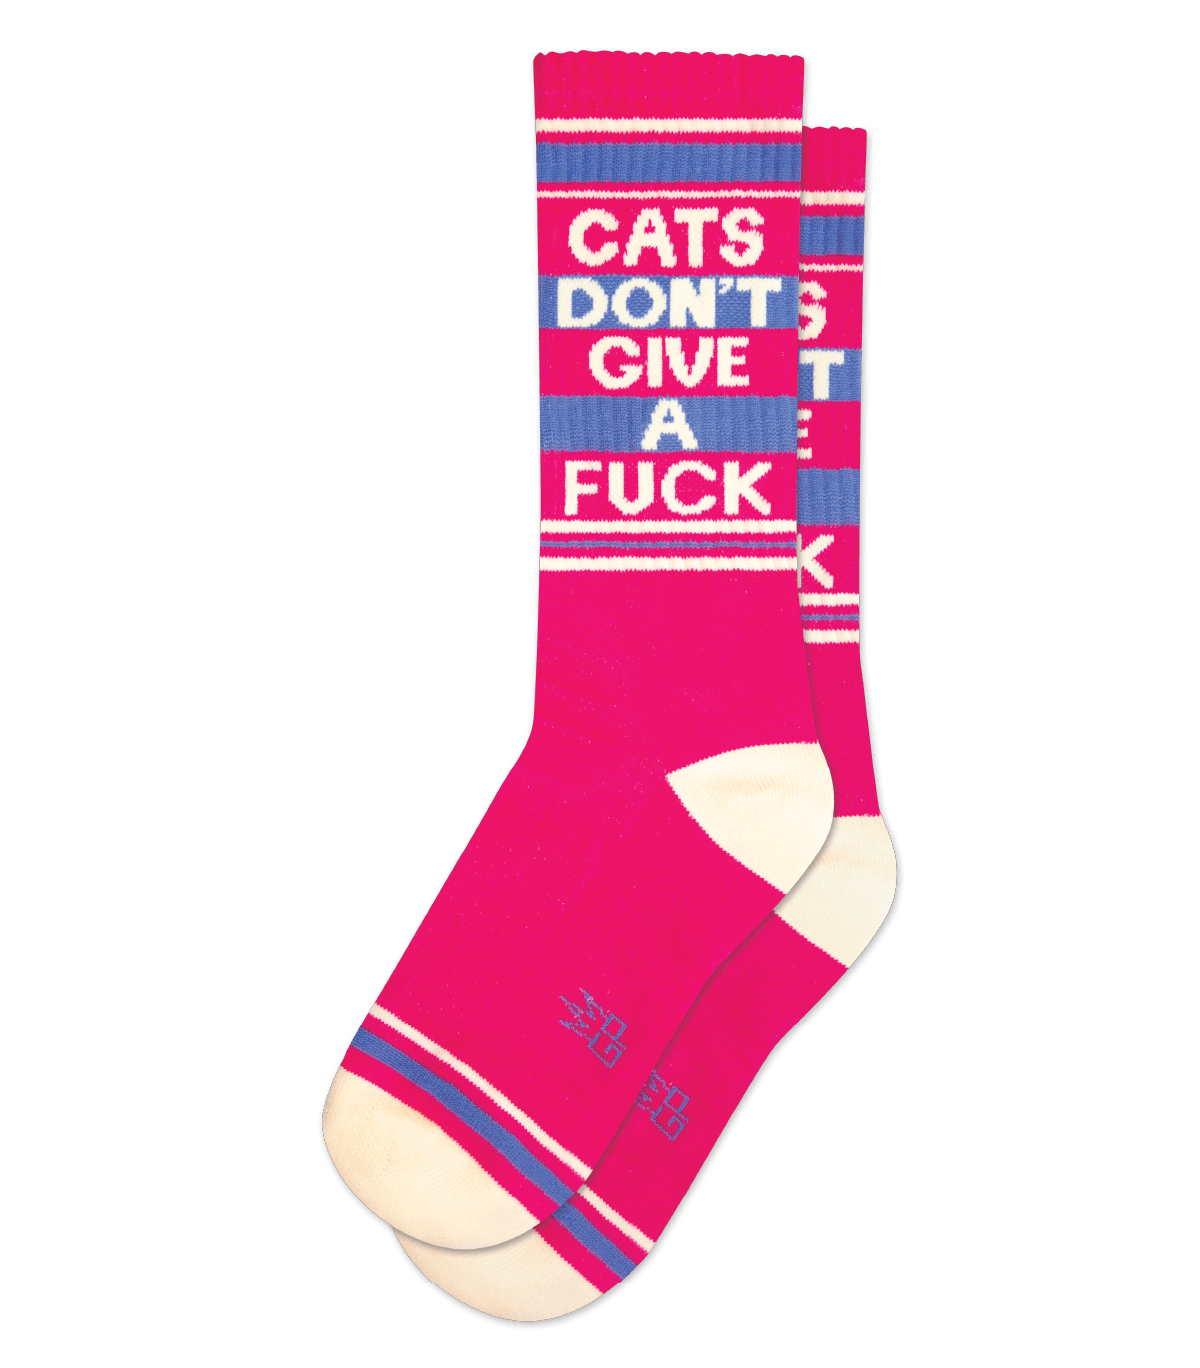 Cats Don't Give a Fuck